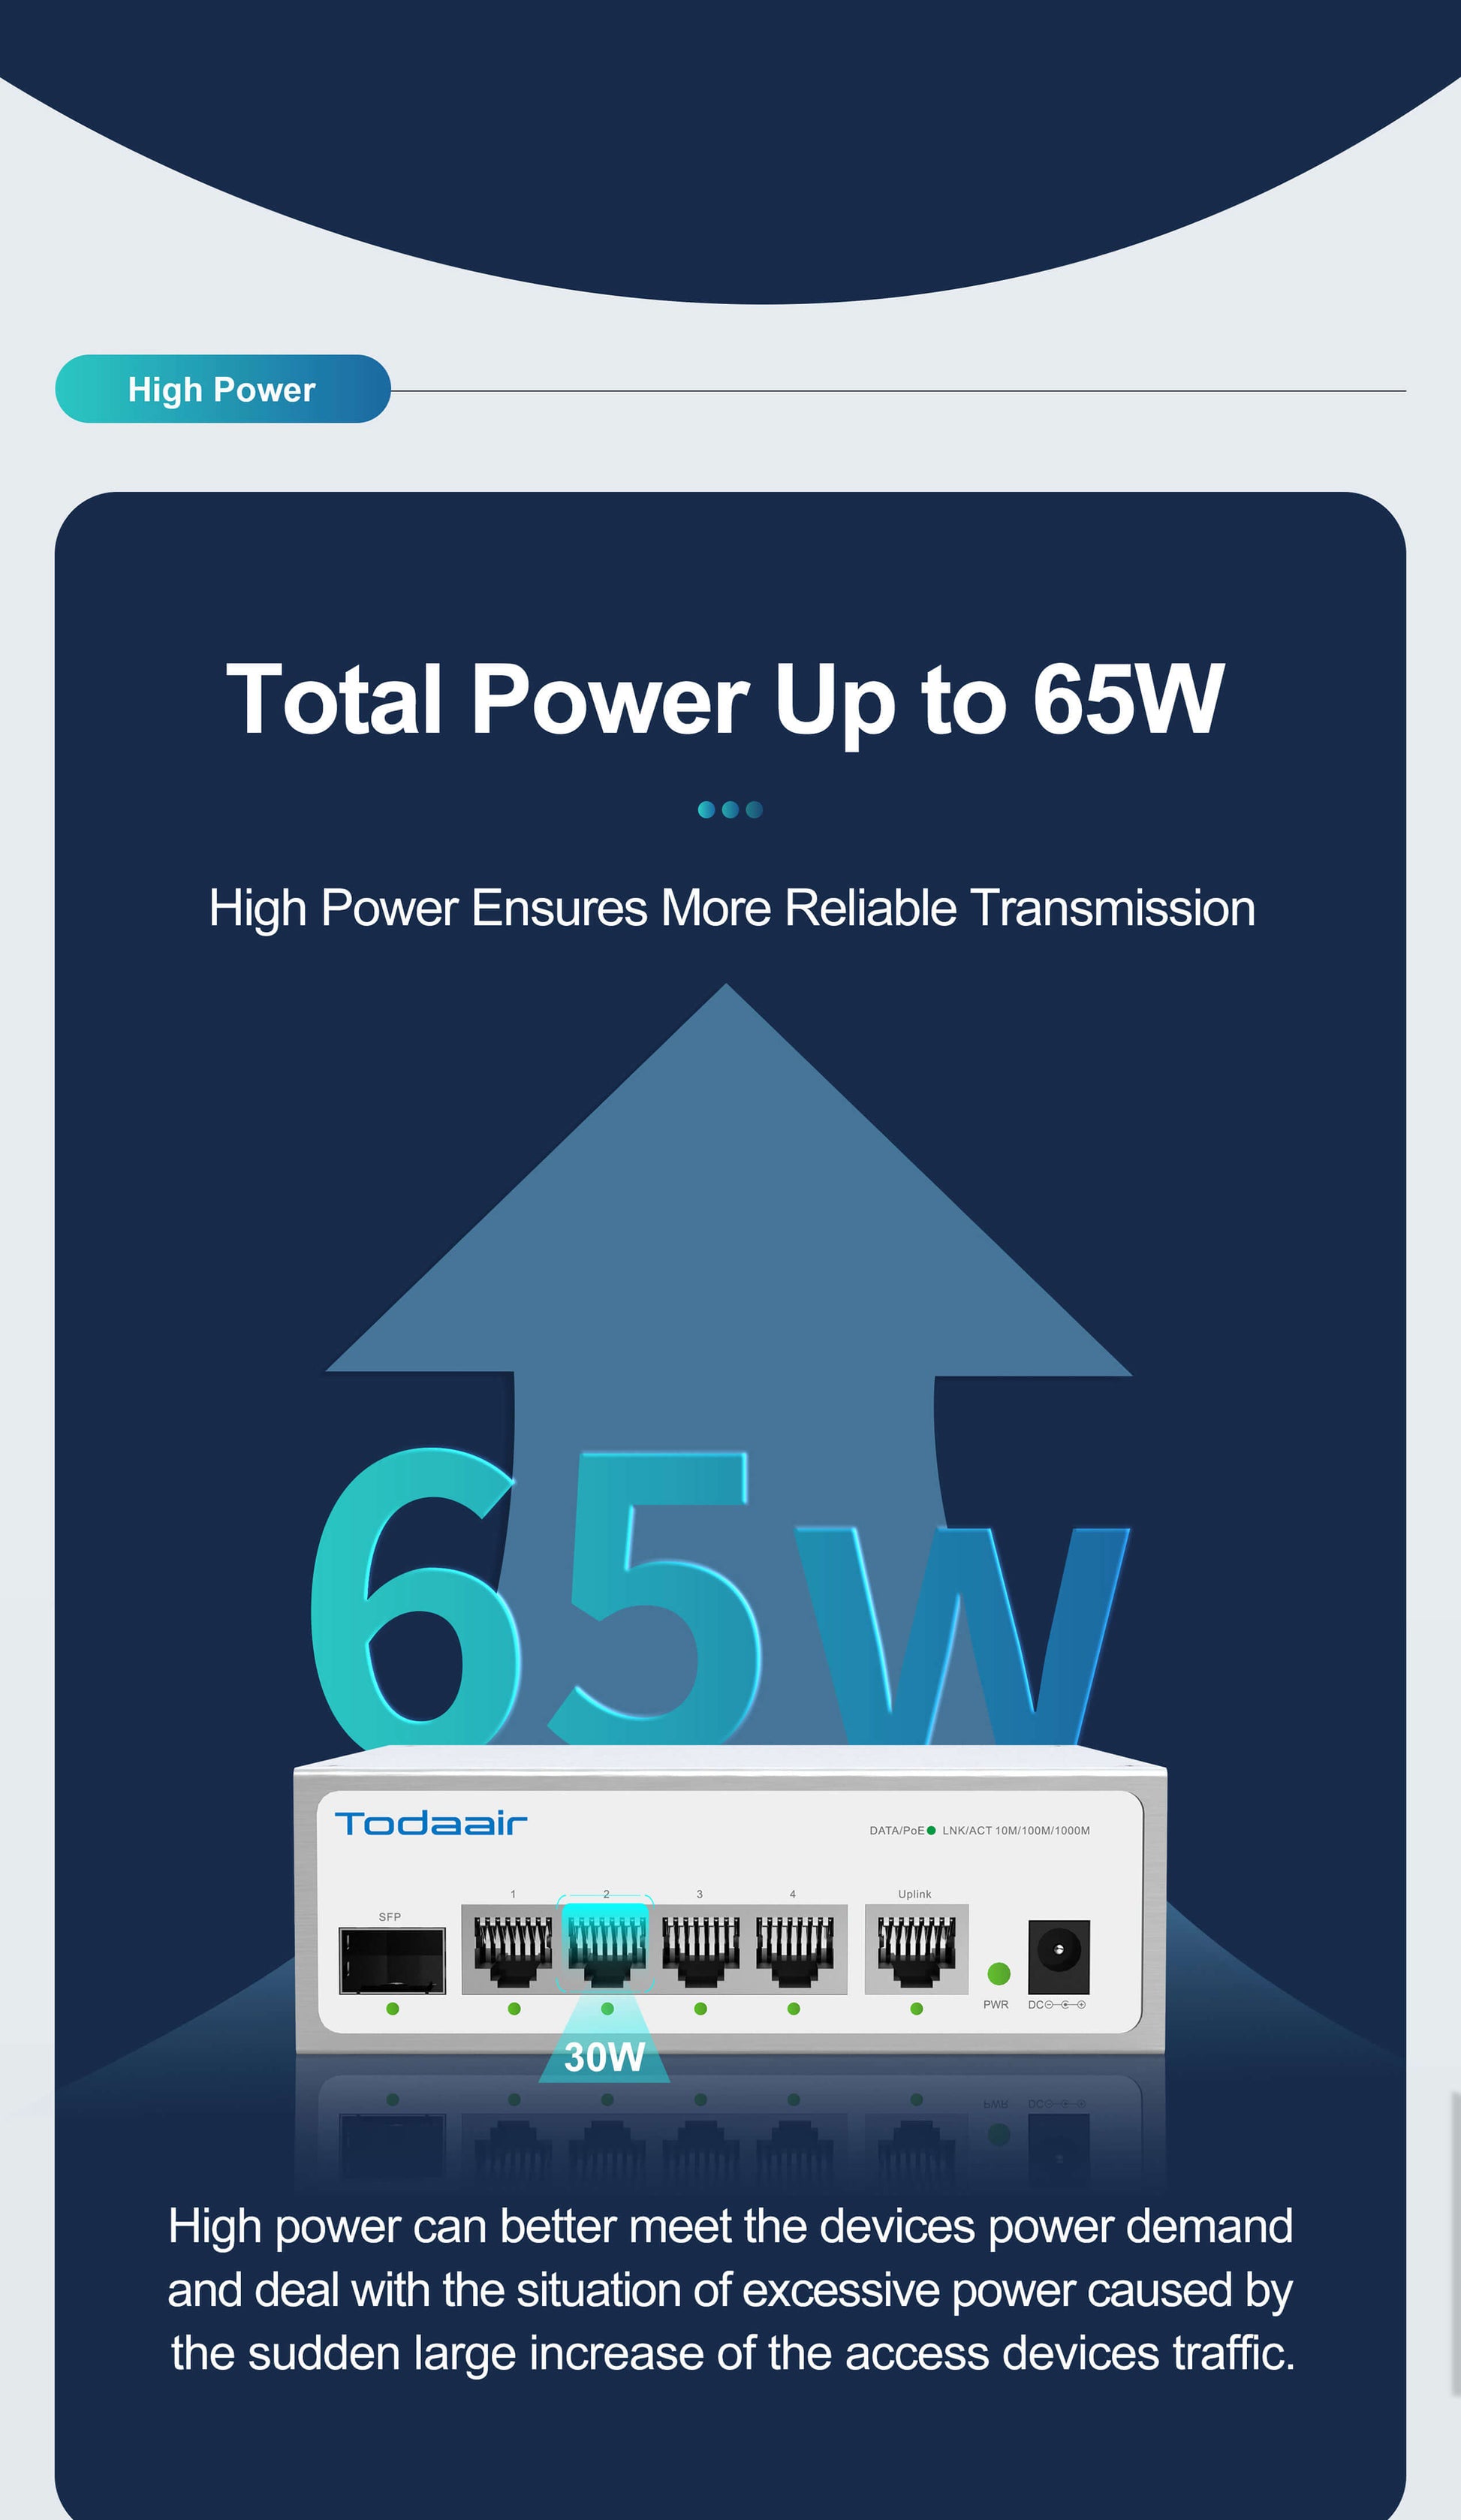 total power up to 65W